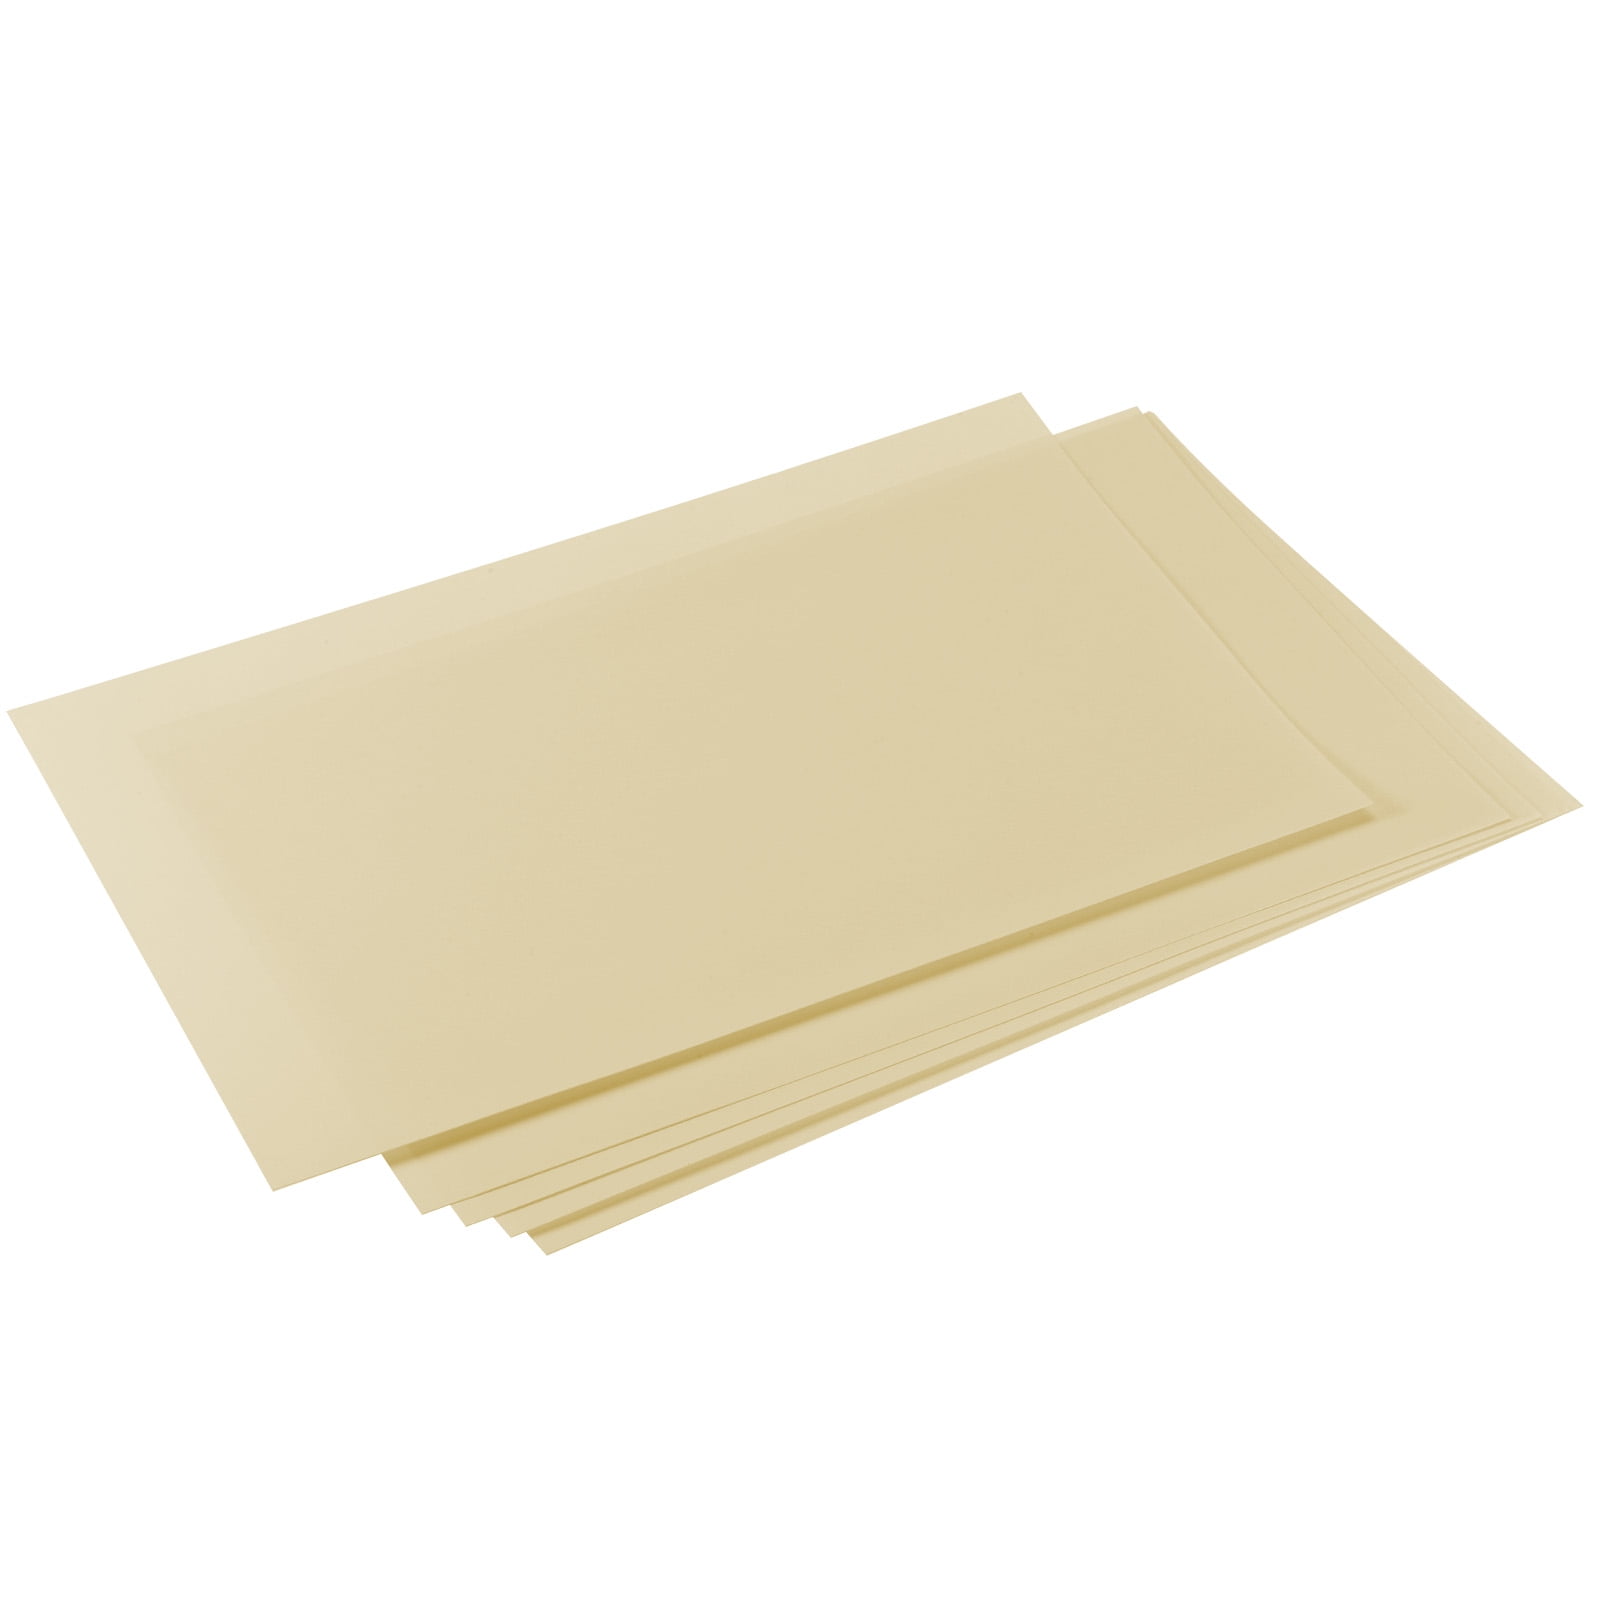 Uxcell Shrink Plastic Sheet 11.42 x 7.87 x 0.006 inch Glossy Shrink Films  Paper 10 Pack 